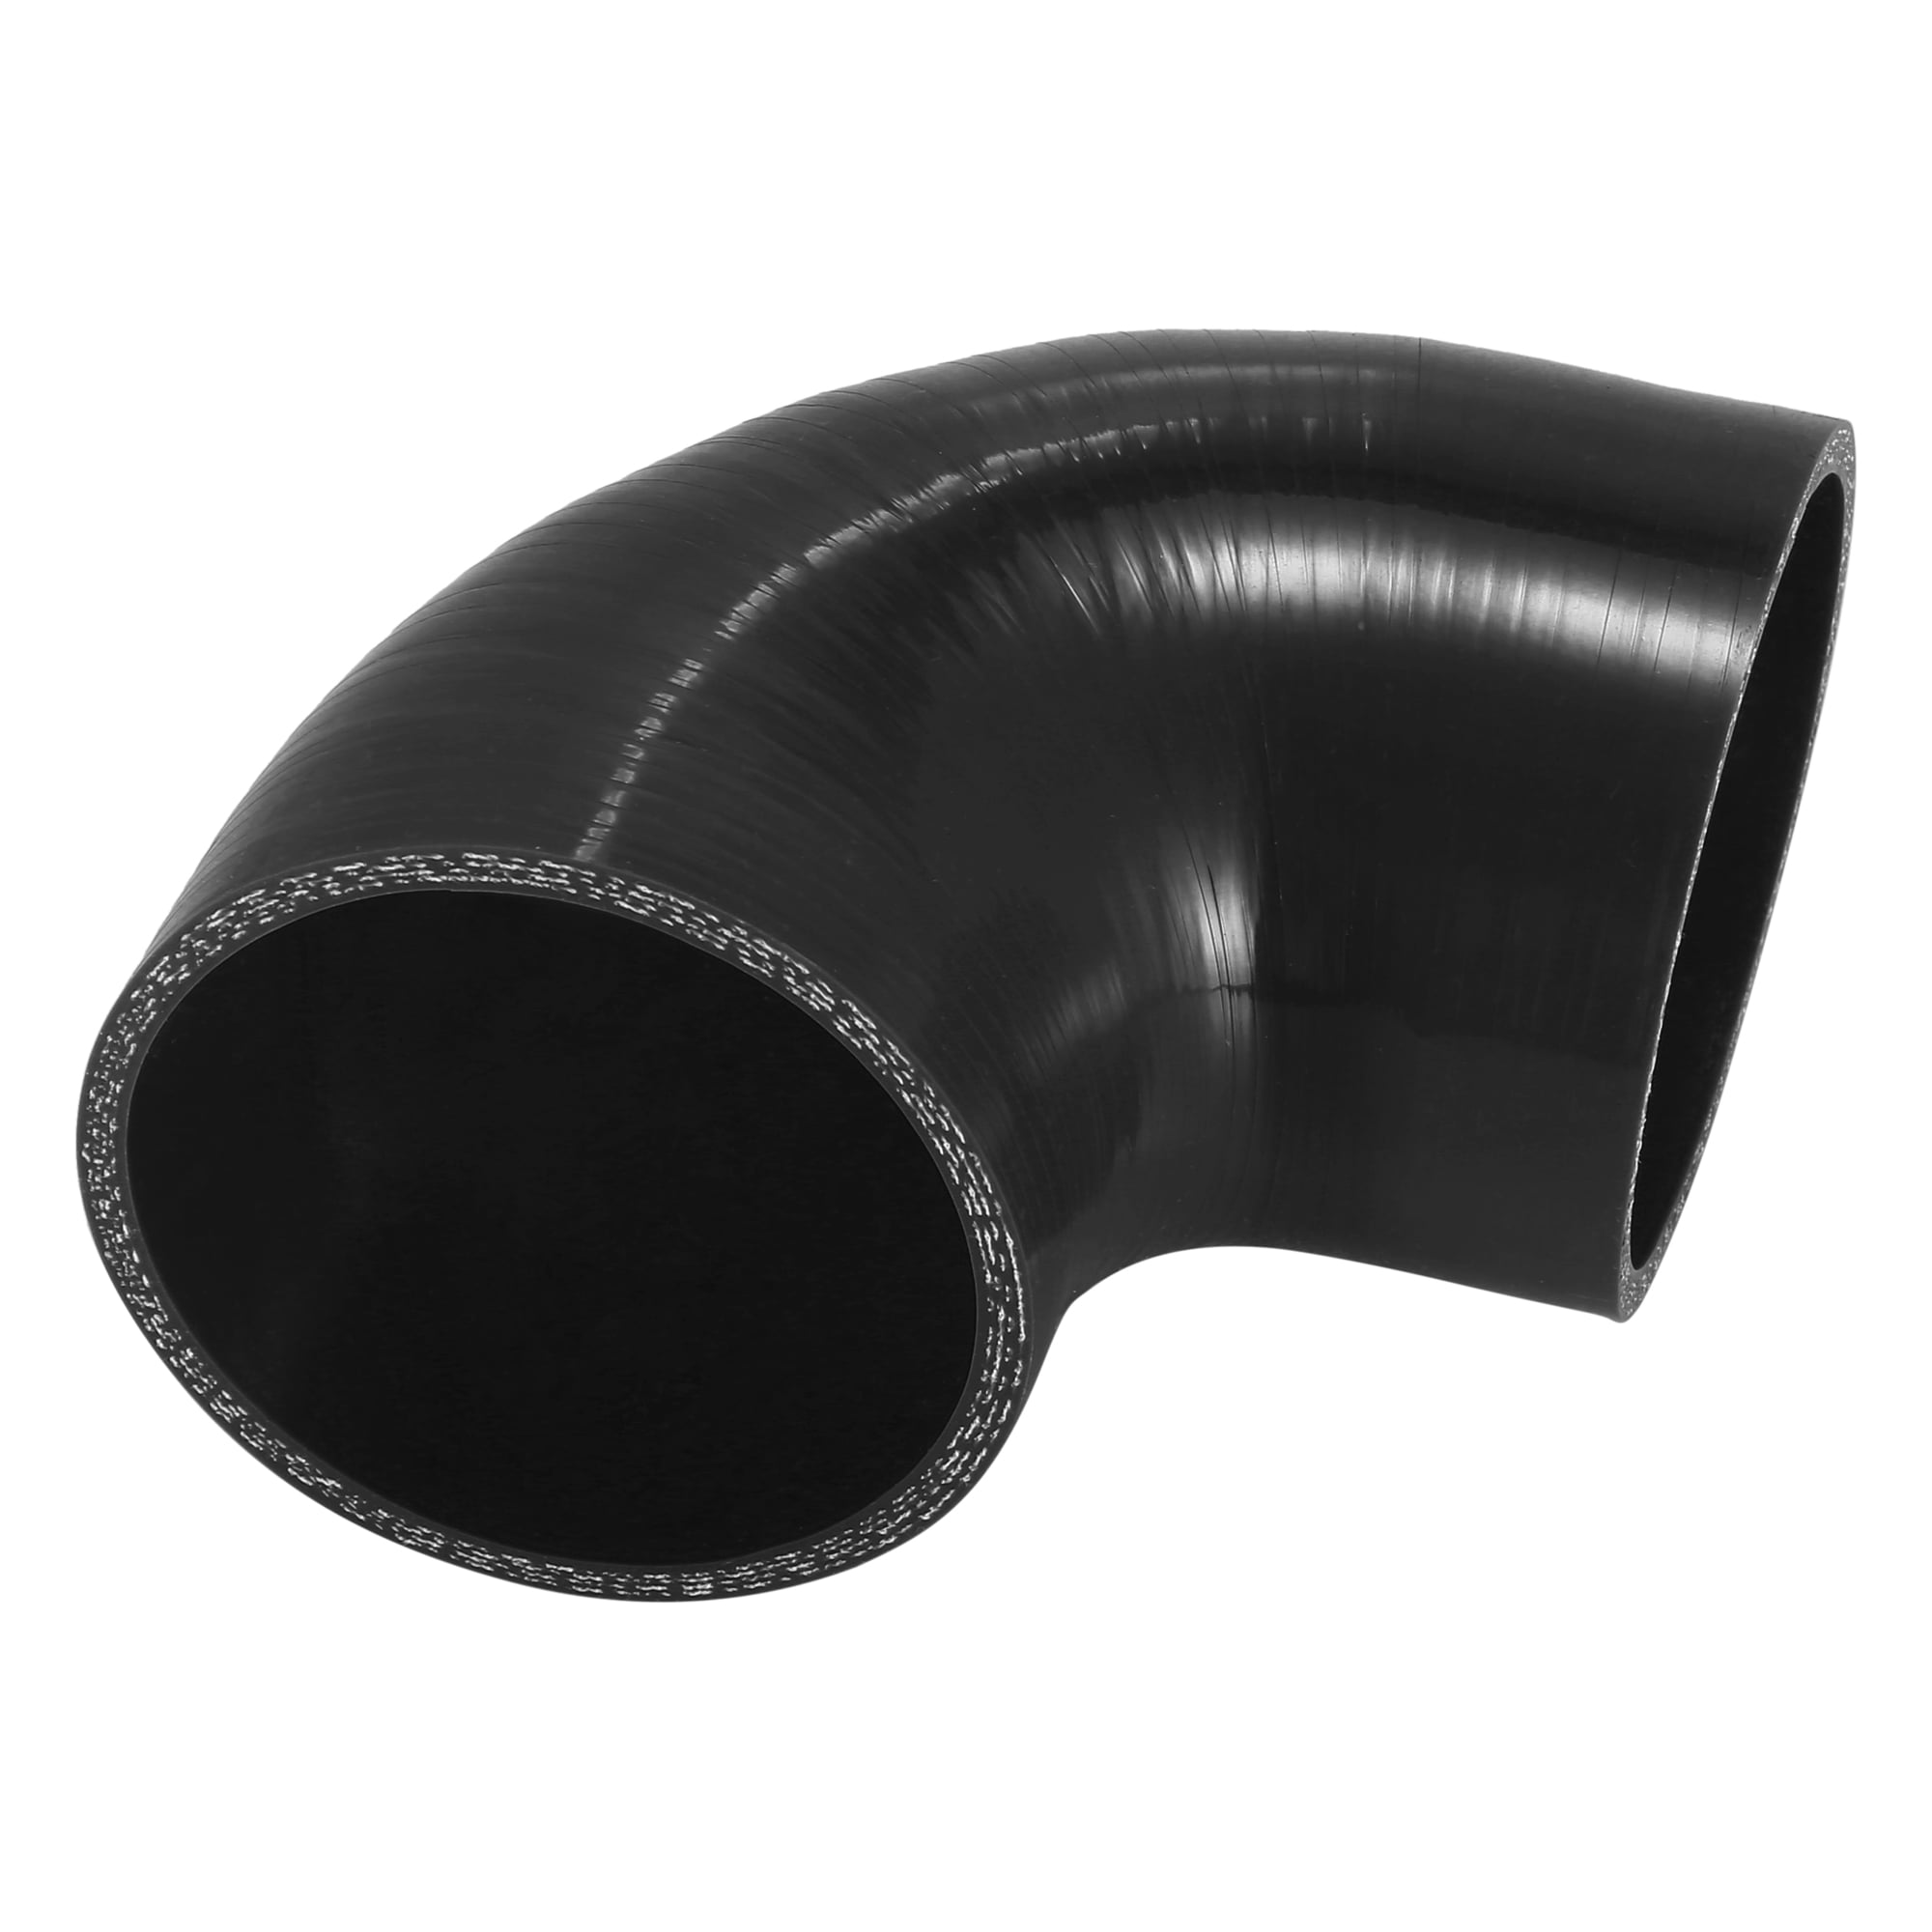 Black 3 Length 2-3/4  3-1/8 ID HPS Silicone Hoses HPS HTSR-275-312-BLK Silicone High Temperature 4-ply Reinforced Reducer Coupler Hose 3 Length 2-3/4  3-1/8 ID 50 PSI Maximum Pressure